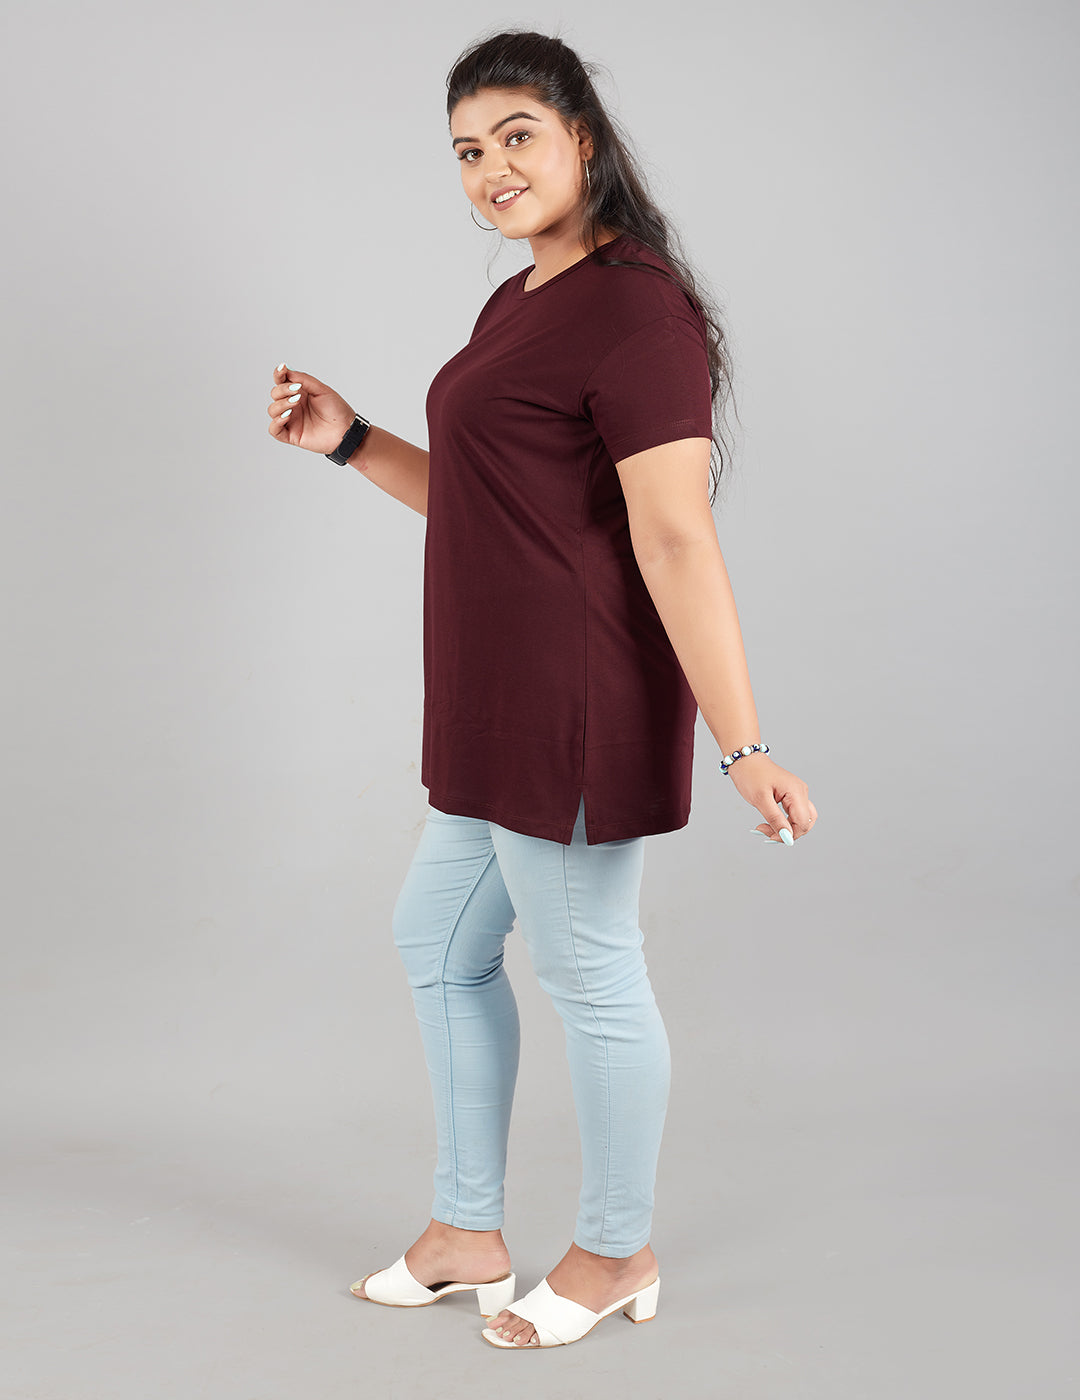 Comfy Wine Plus Size Cotton T-shirts For Women At Best Online